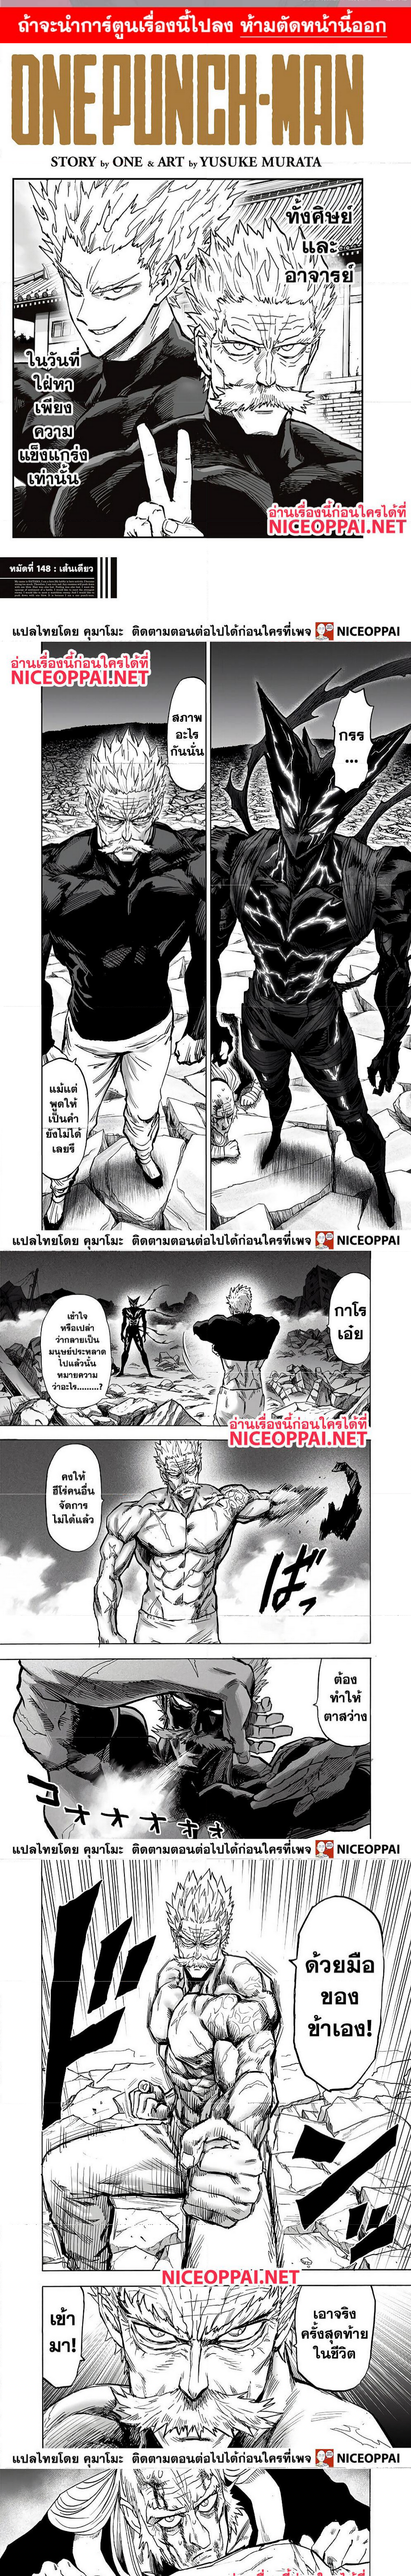 One Punch Man148 (1)